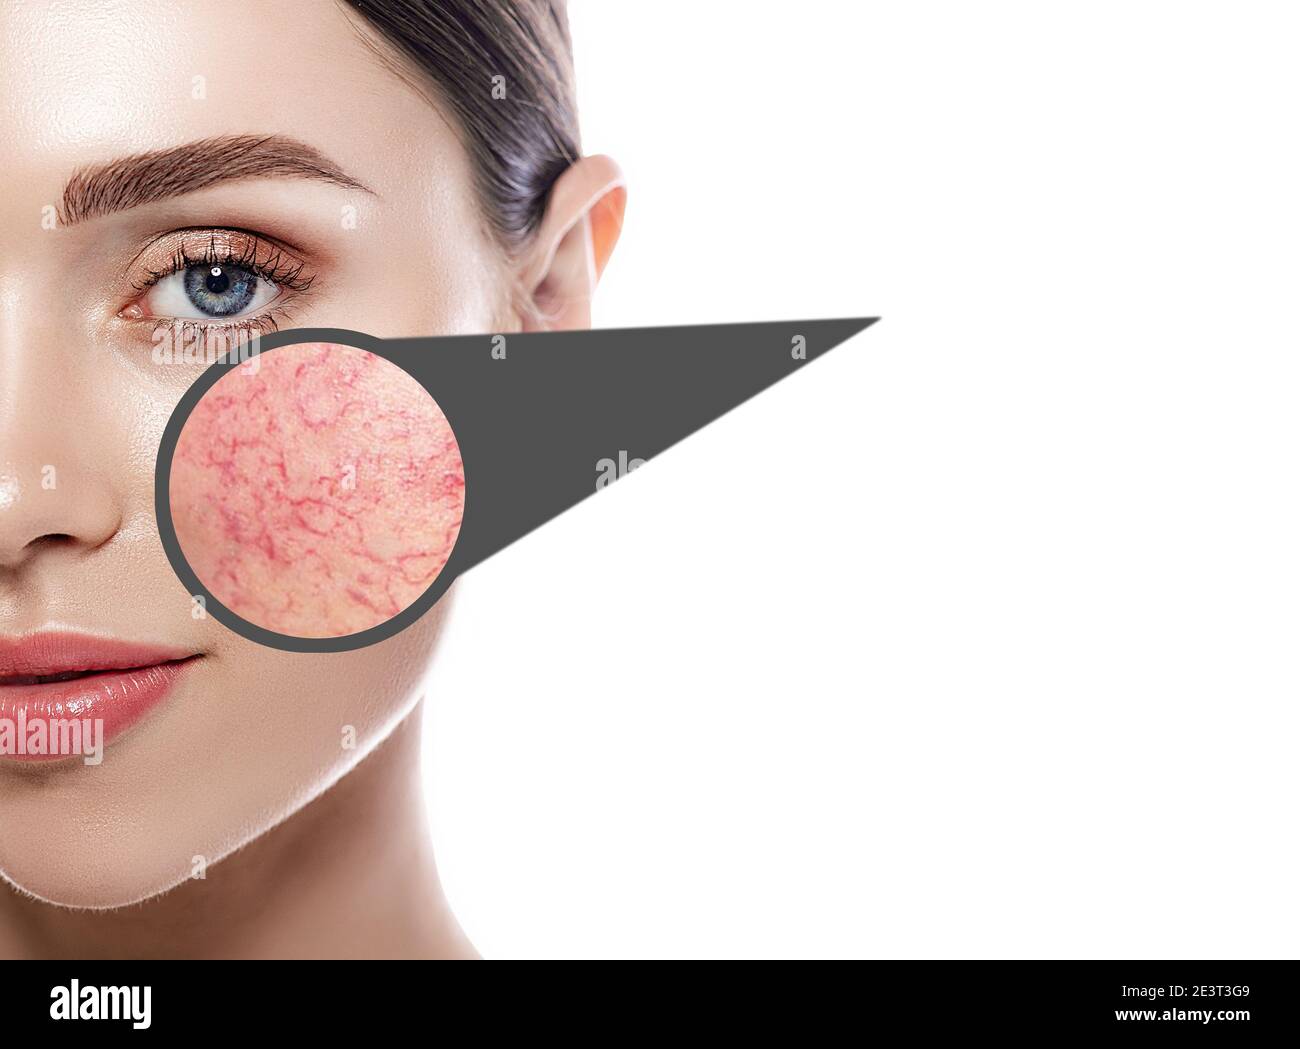 Magnifying glass showing couperose on face skin. Woman showing problems couperose-prone sensitive skin. Rosacea Stock Photo